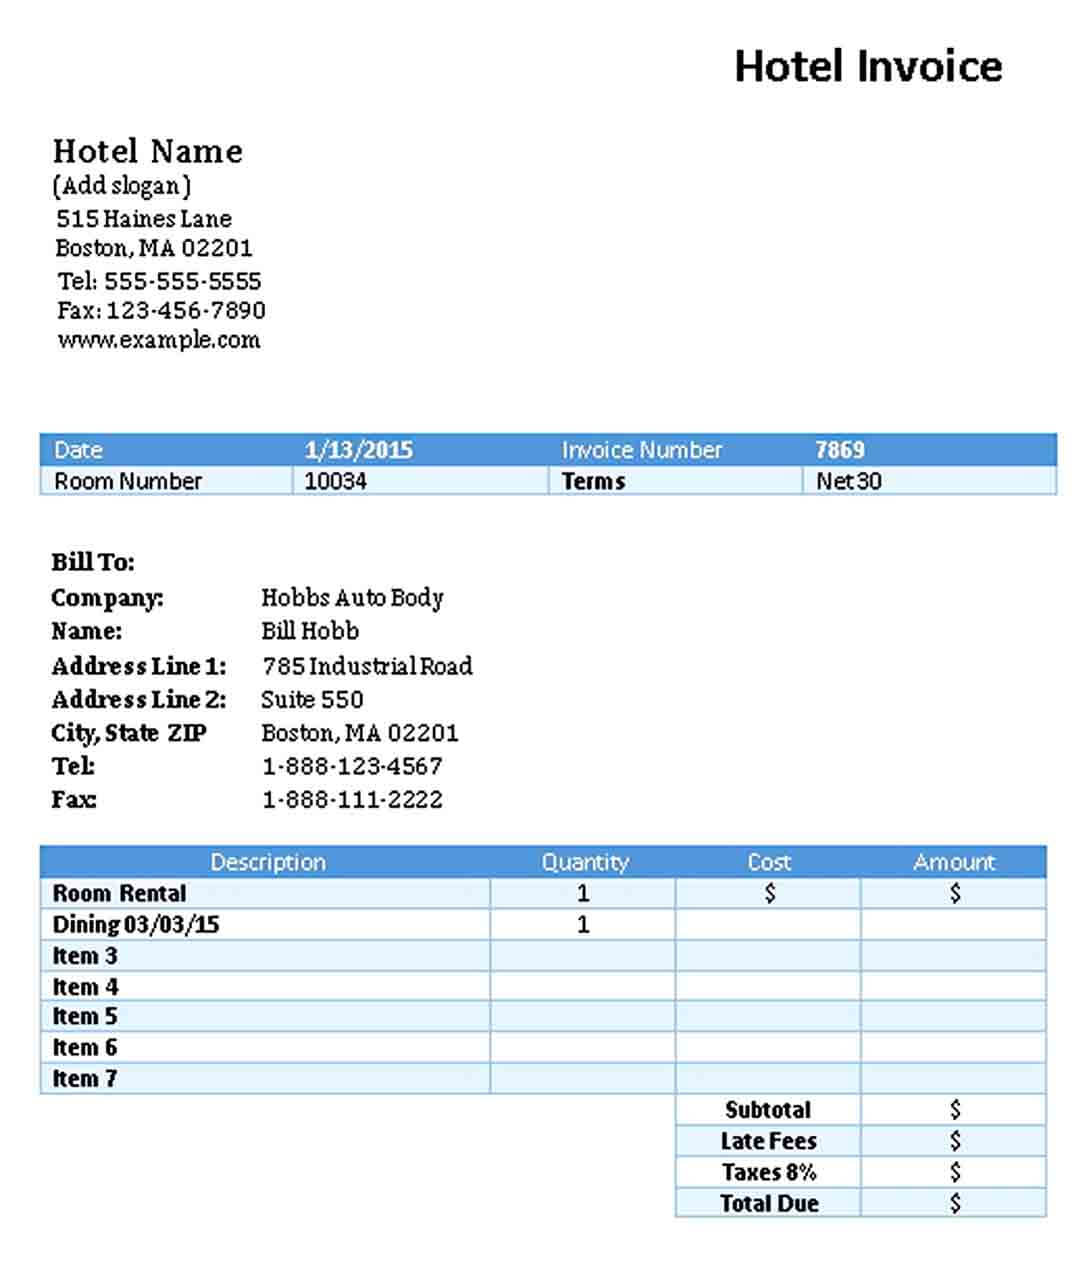 Receipt of Hotel Sample Template